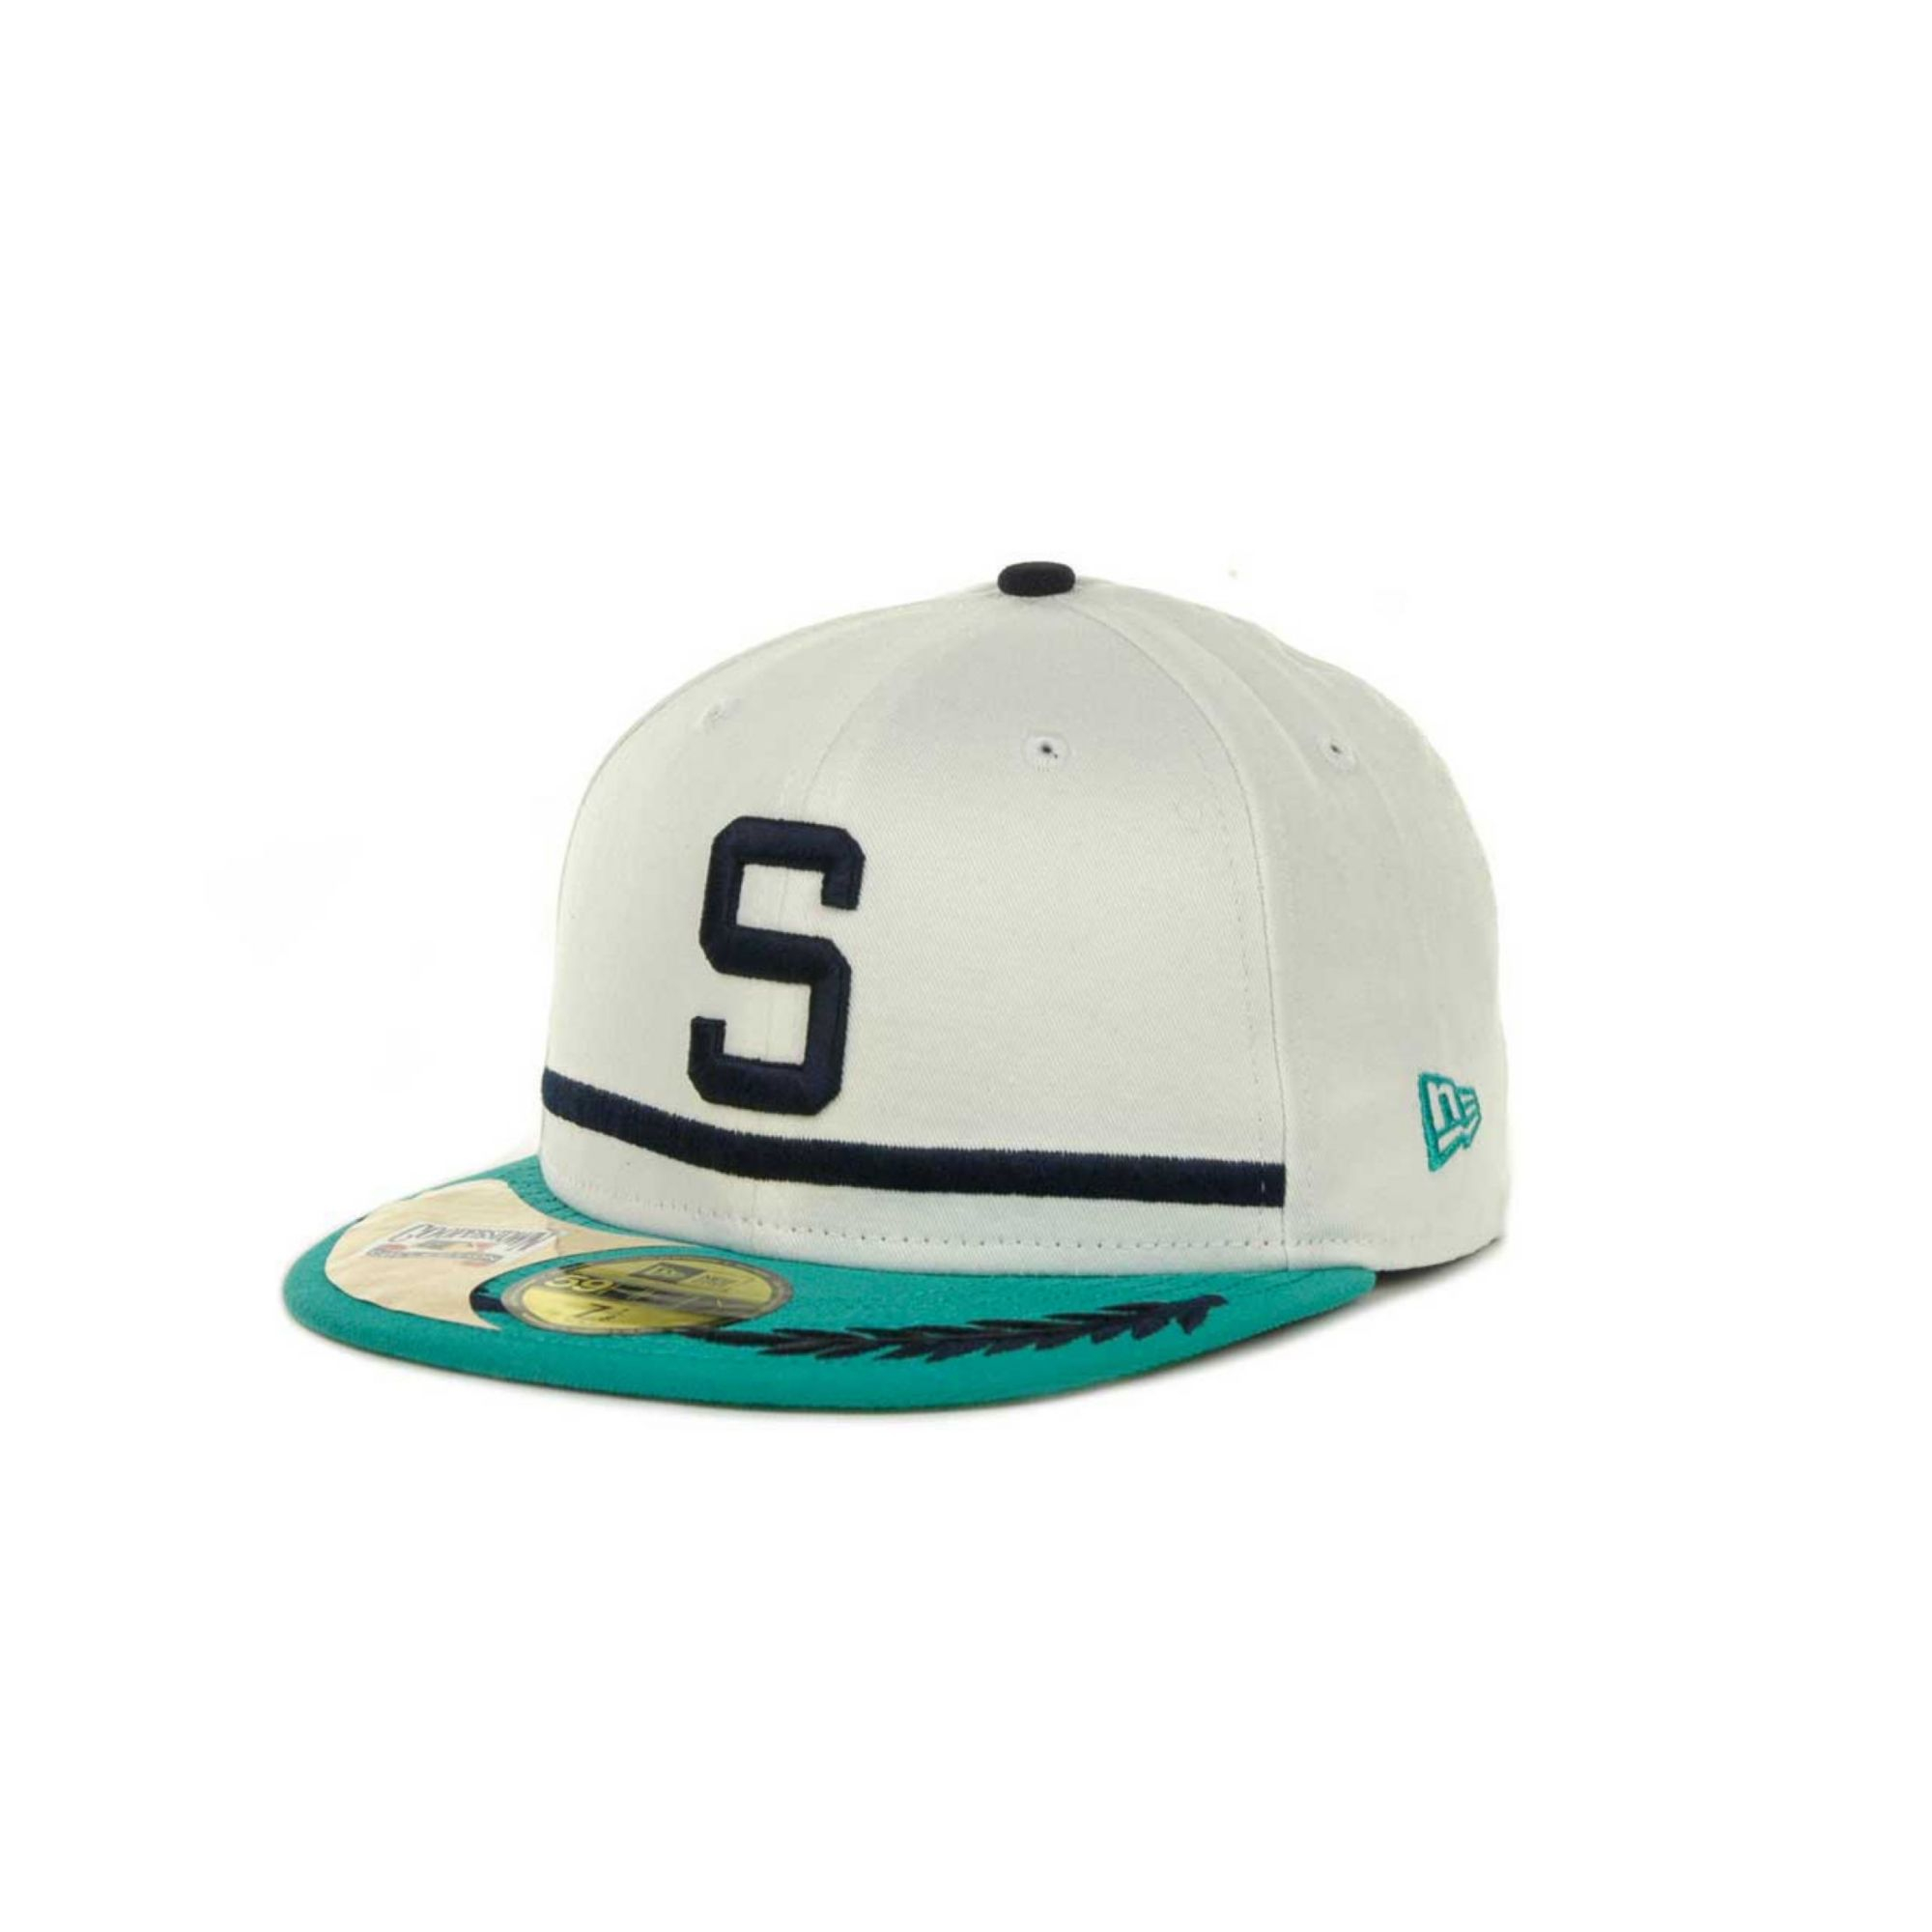 KTZ Seattle Pilots Cooperstown Patch 59fifty Cap in White for Men